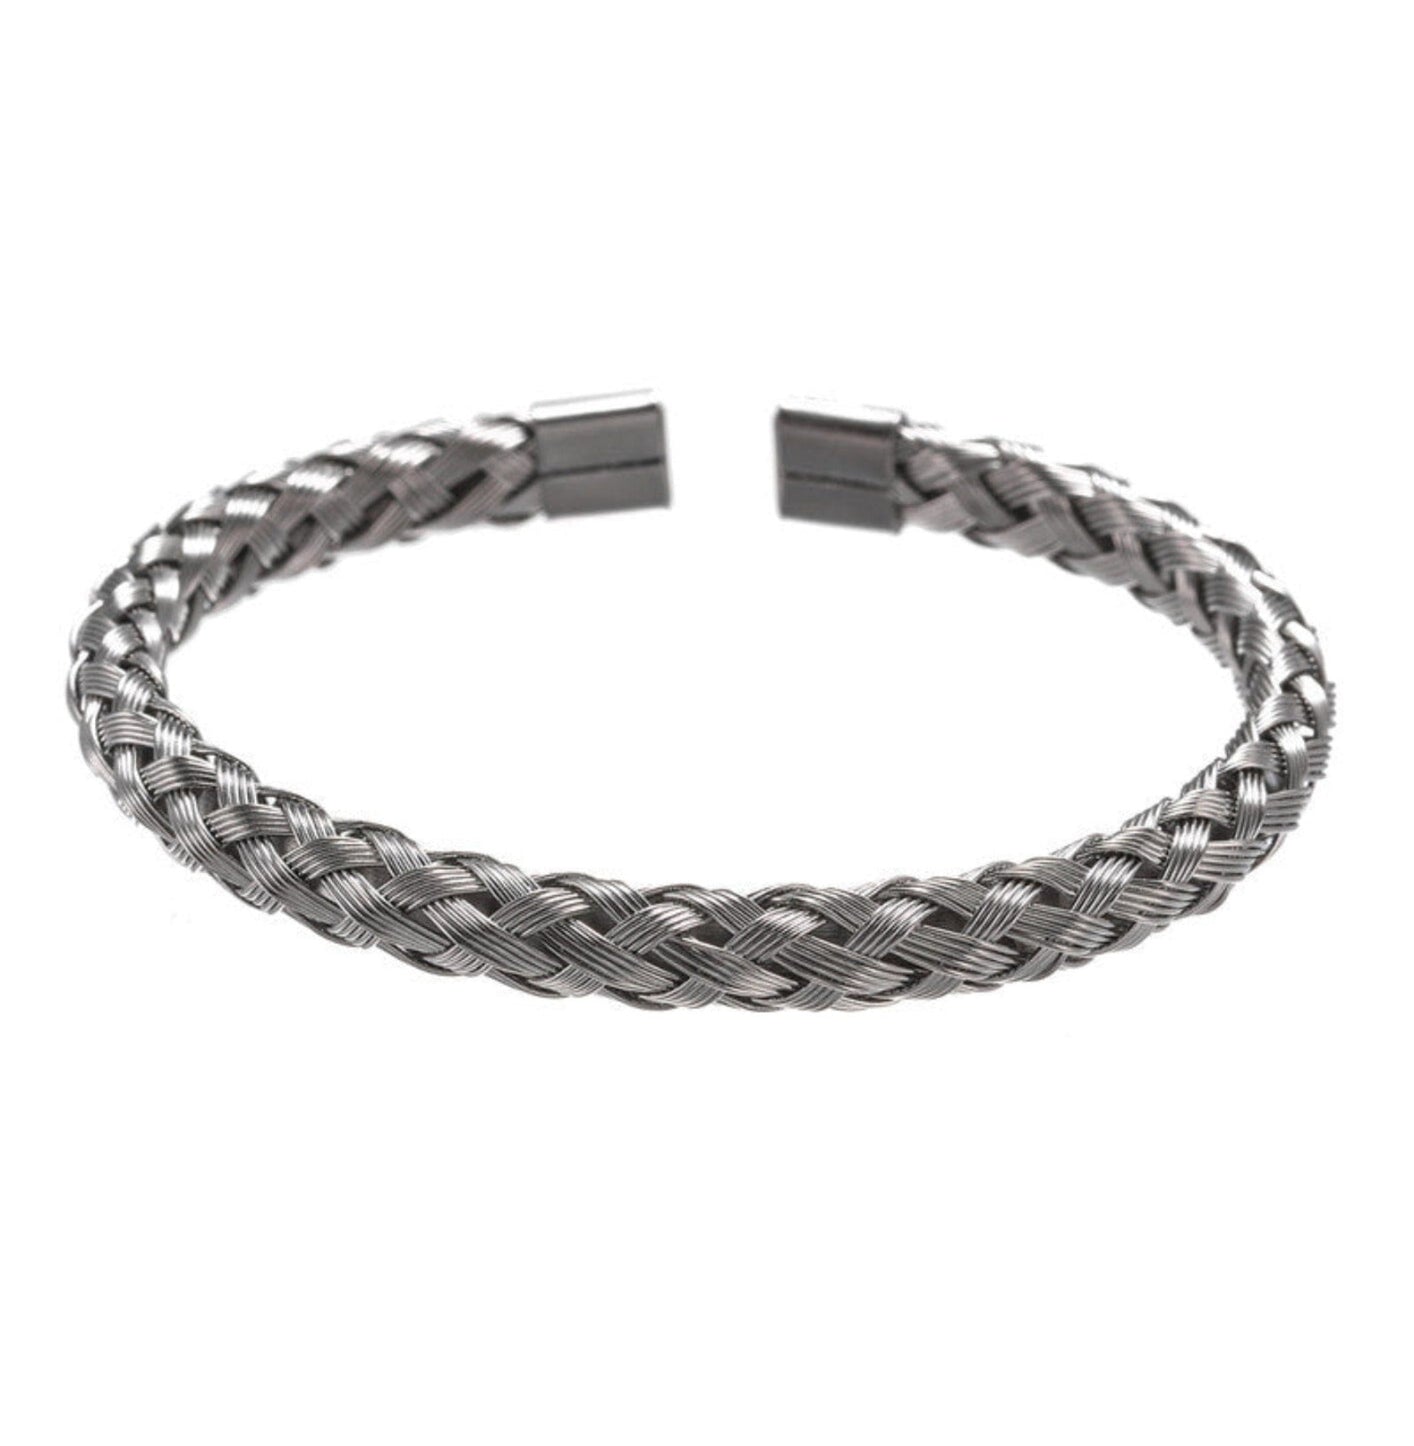 WOVEN BANGLE - SILVER ring Yubama Jewelry Online Store - The Elegant Designs of Gold and Silver ! Silver 